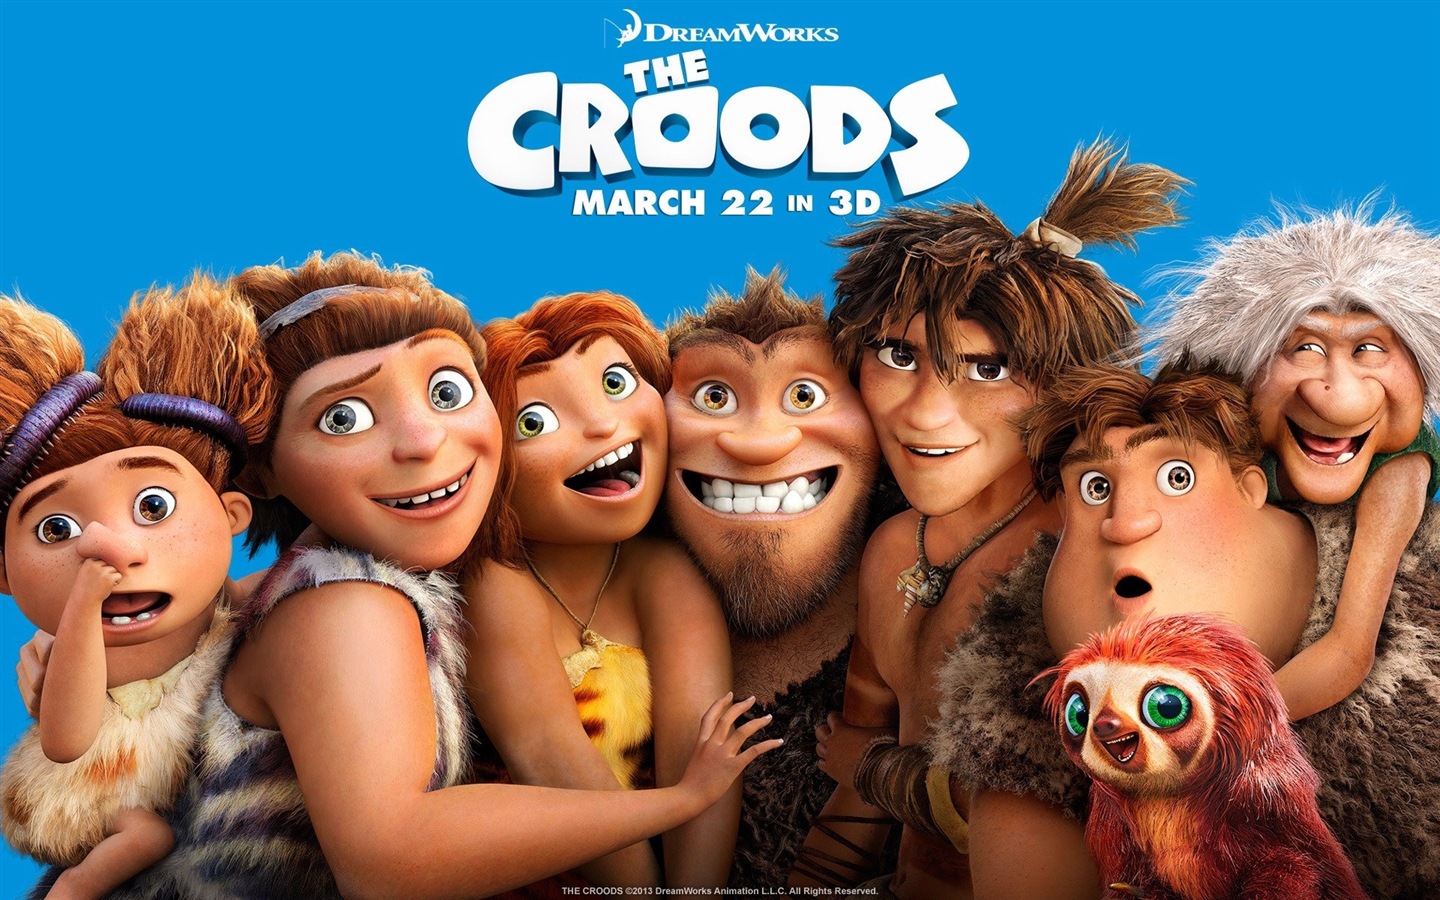 The Croods HD movie wallpapers #3 - 1440x900